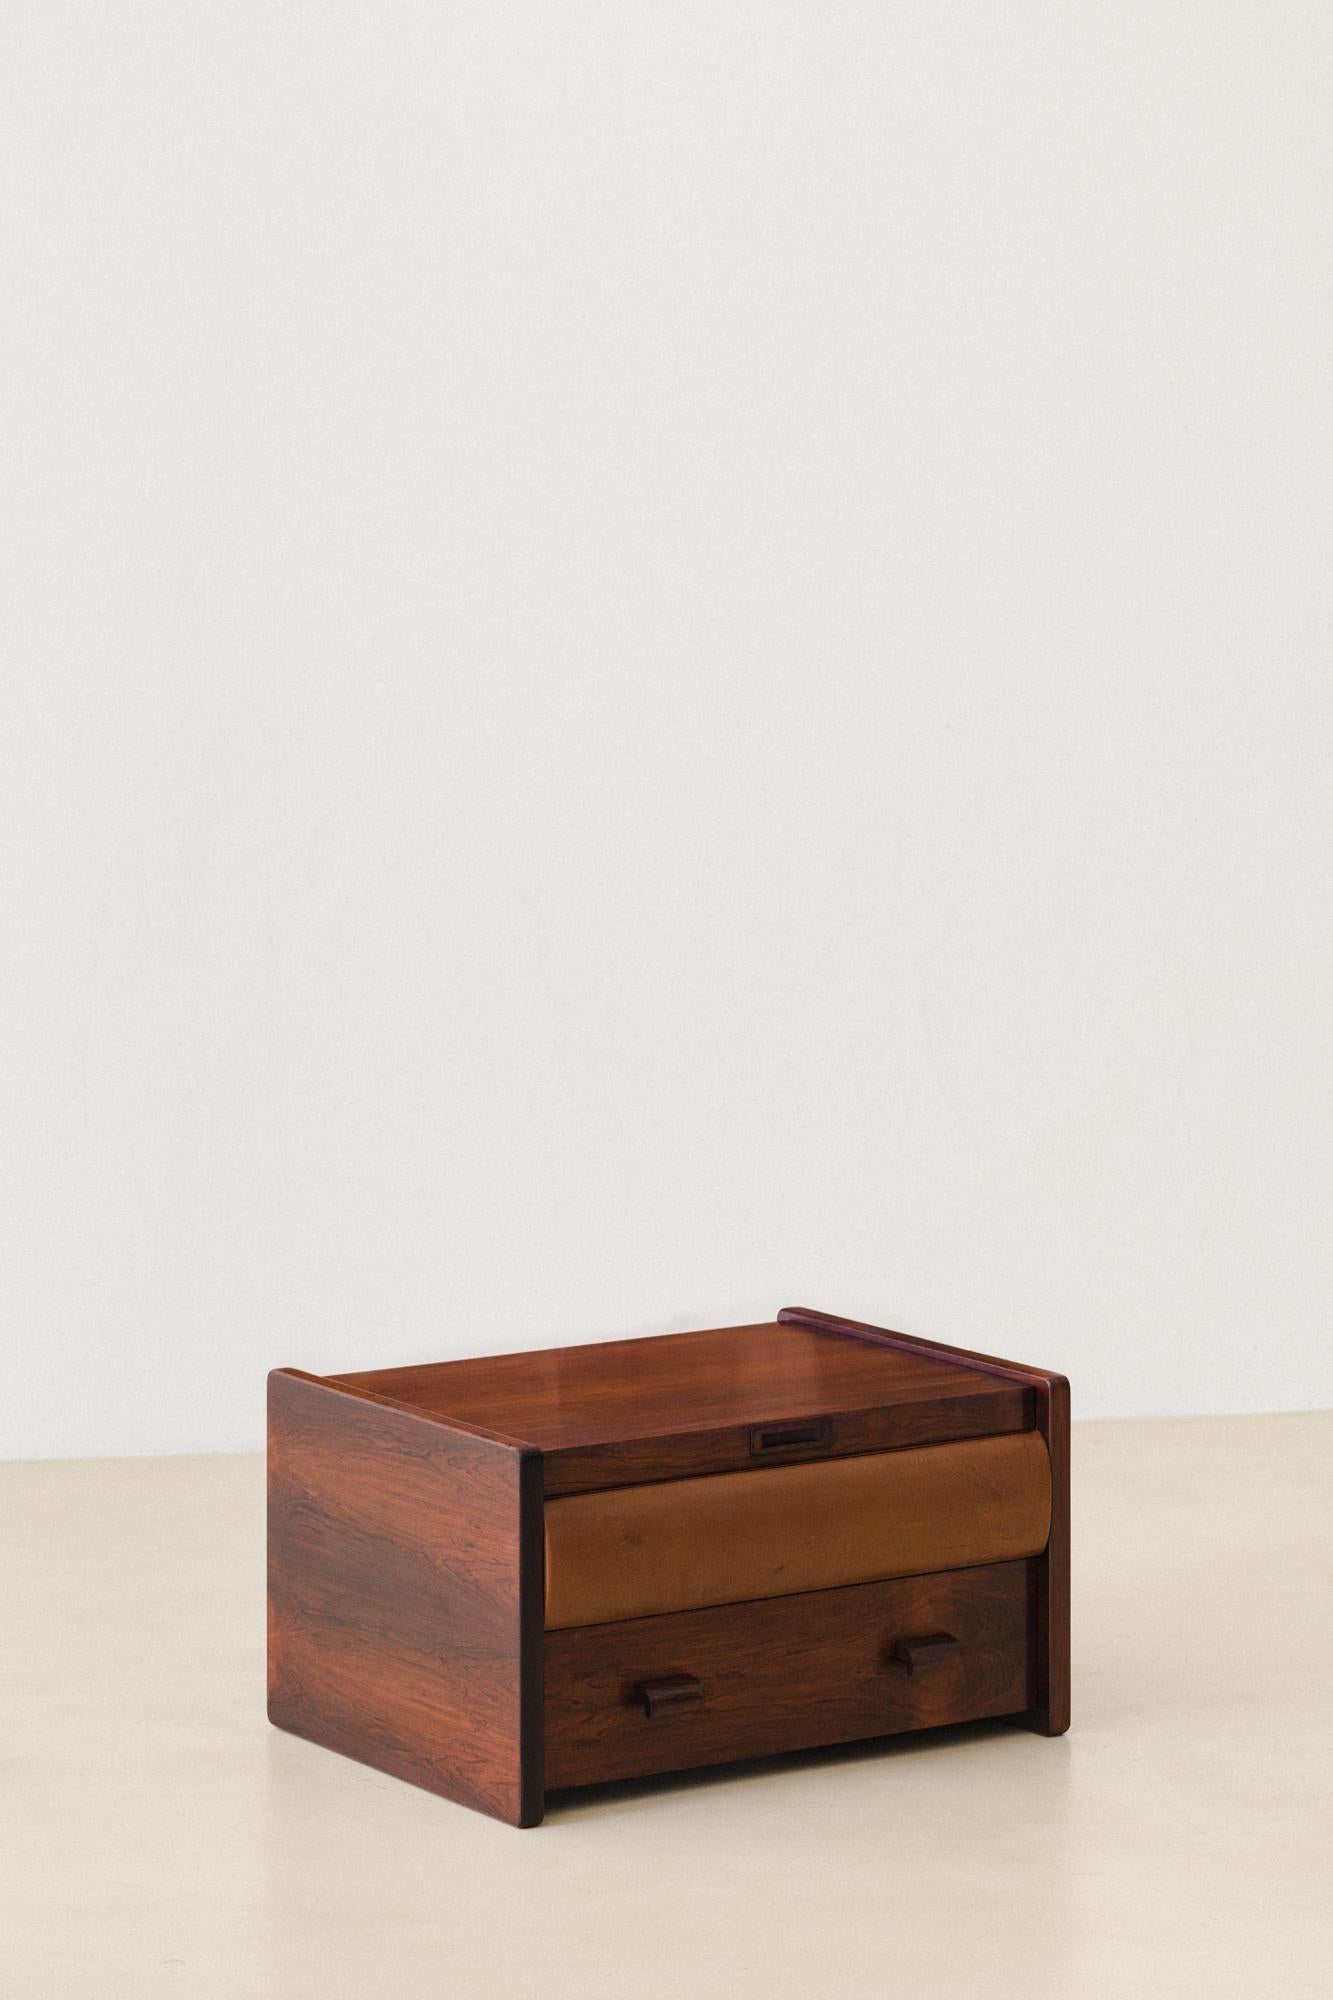 Rosewood Storage Chest by Celina Decoracoes, 1960s, Midcentury Brazilian Design In Good Condition For Sale In New York, NY